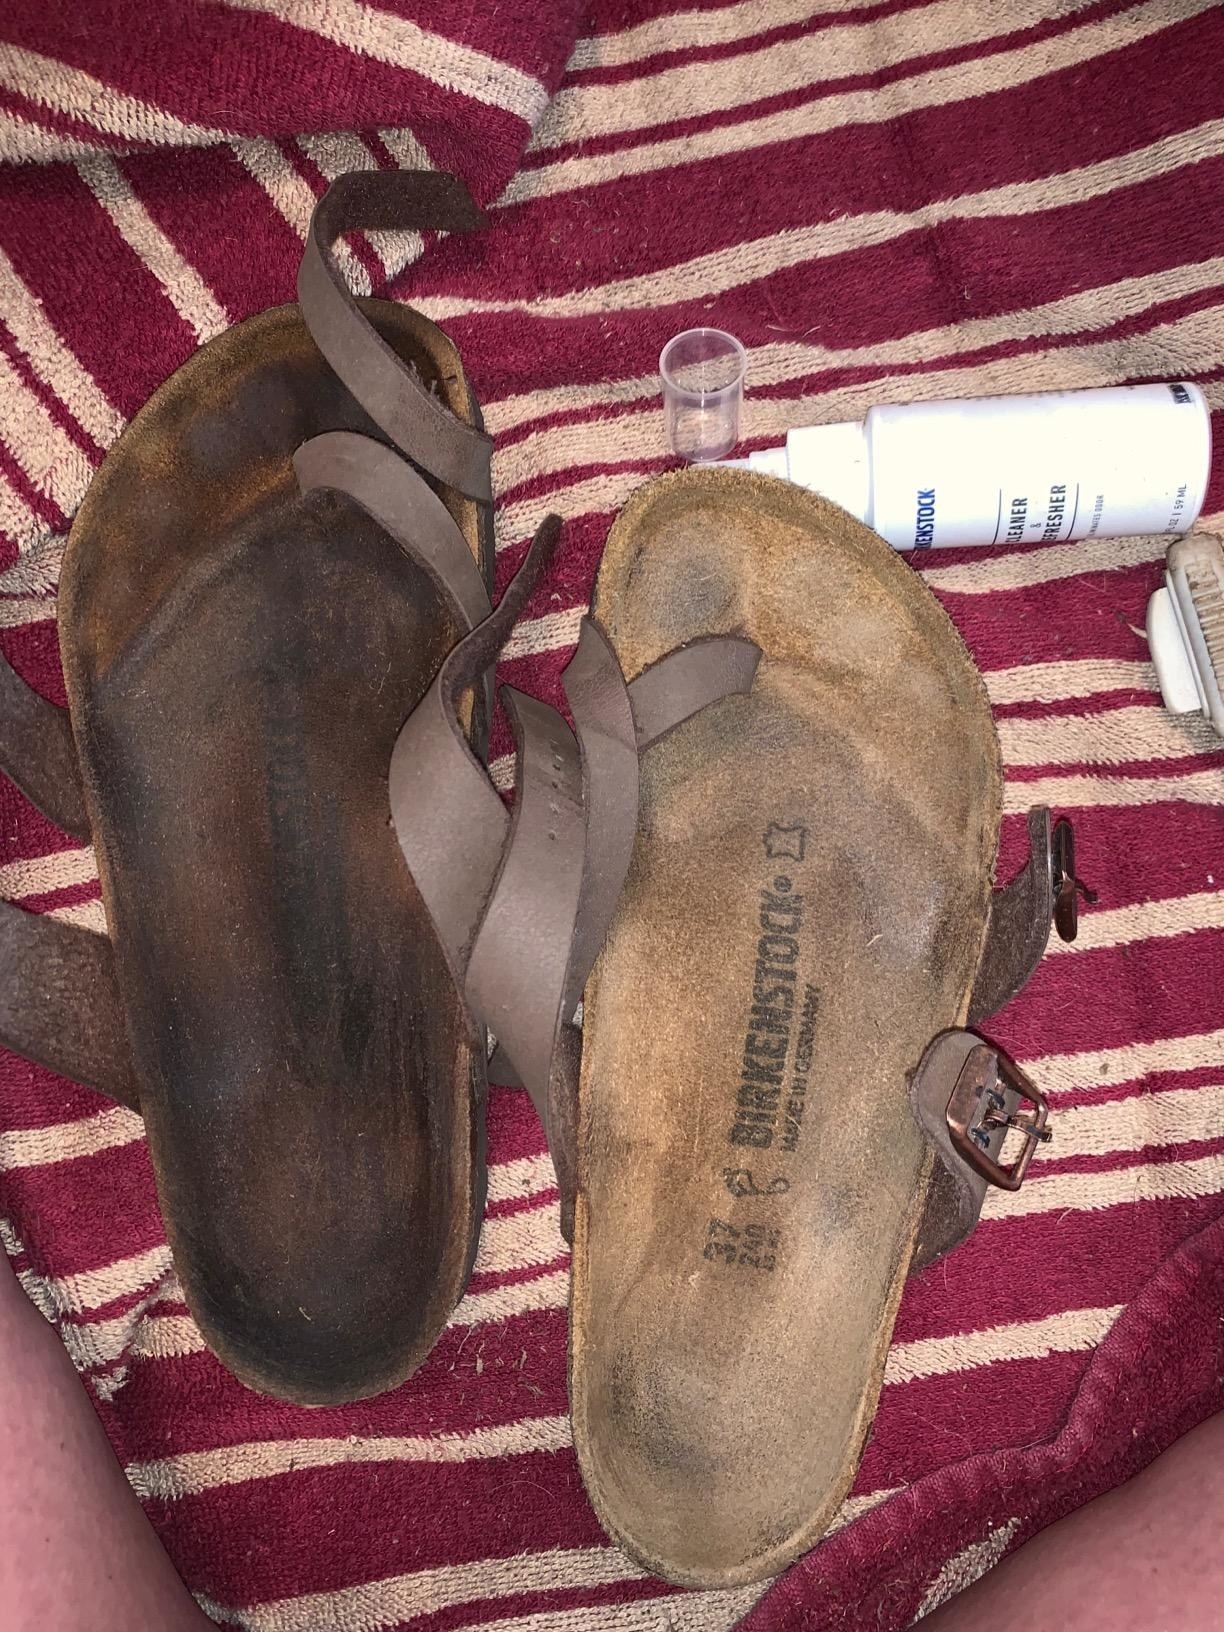 reviewer&#x27;s birkenstock very dirty and stained dark, and then a cleaned birkenstock on the right